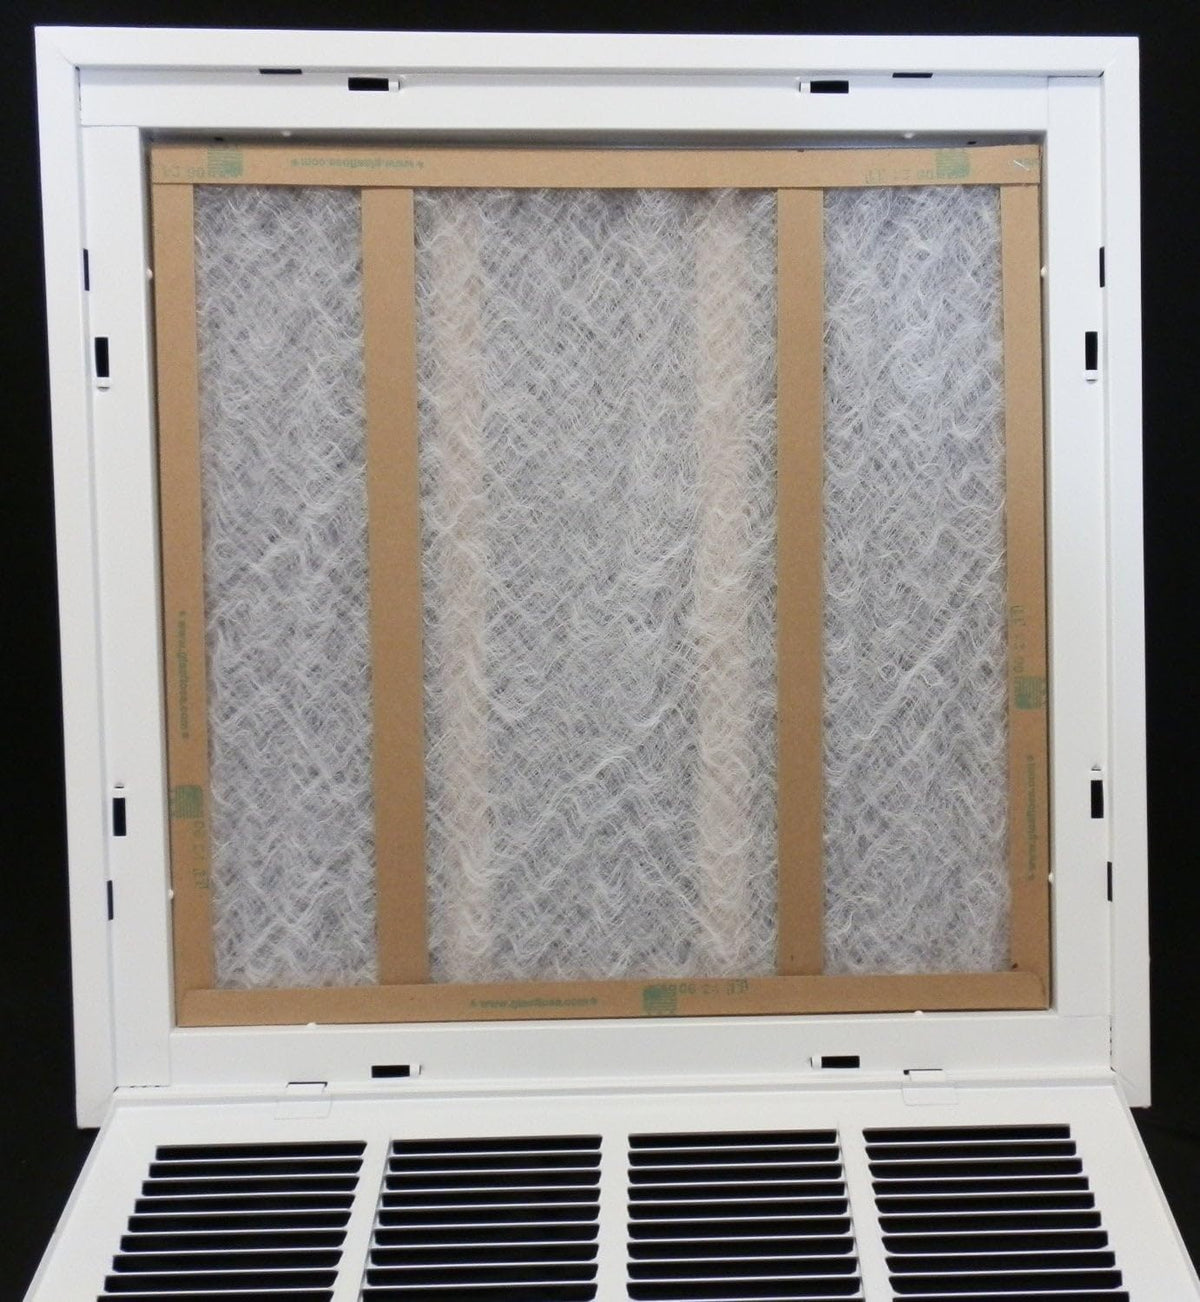 18&quot; X 18&quot; Steel Return Air Filter Grille for 1&quot; Filter - Fixed Hinged - [Outer Dimensions: 20 5/8&quot; X 20 5/8&quot;]